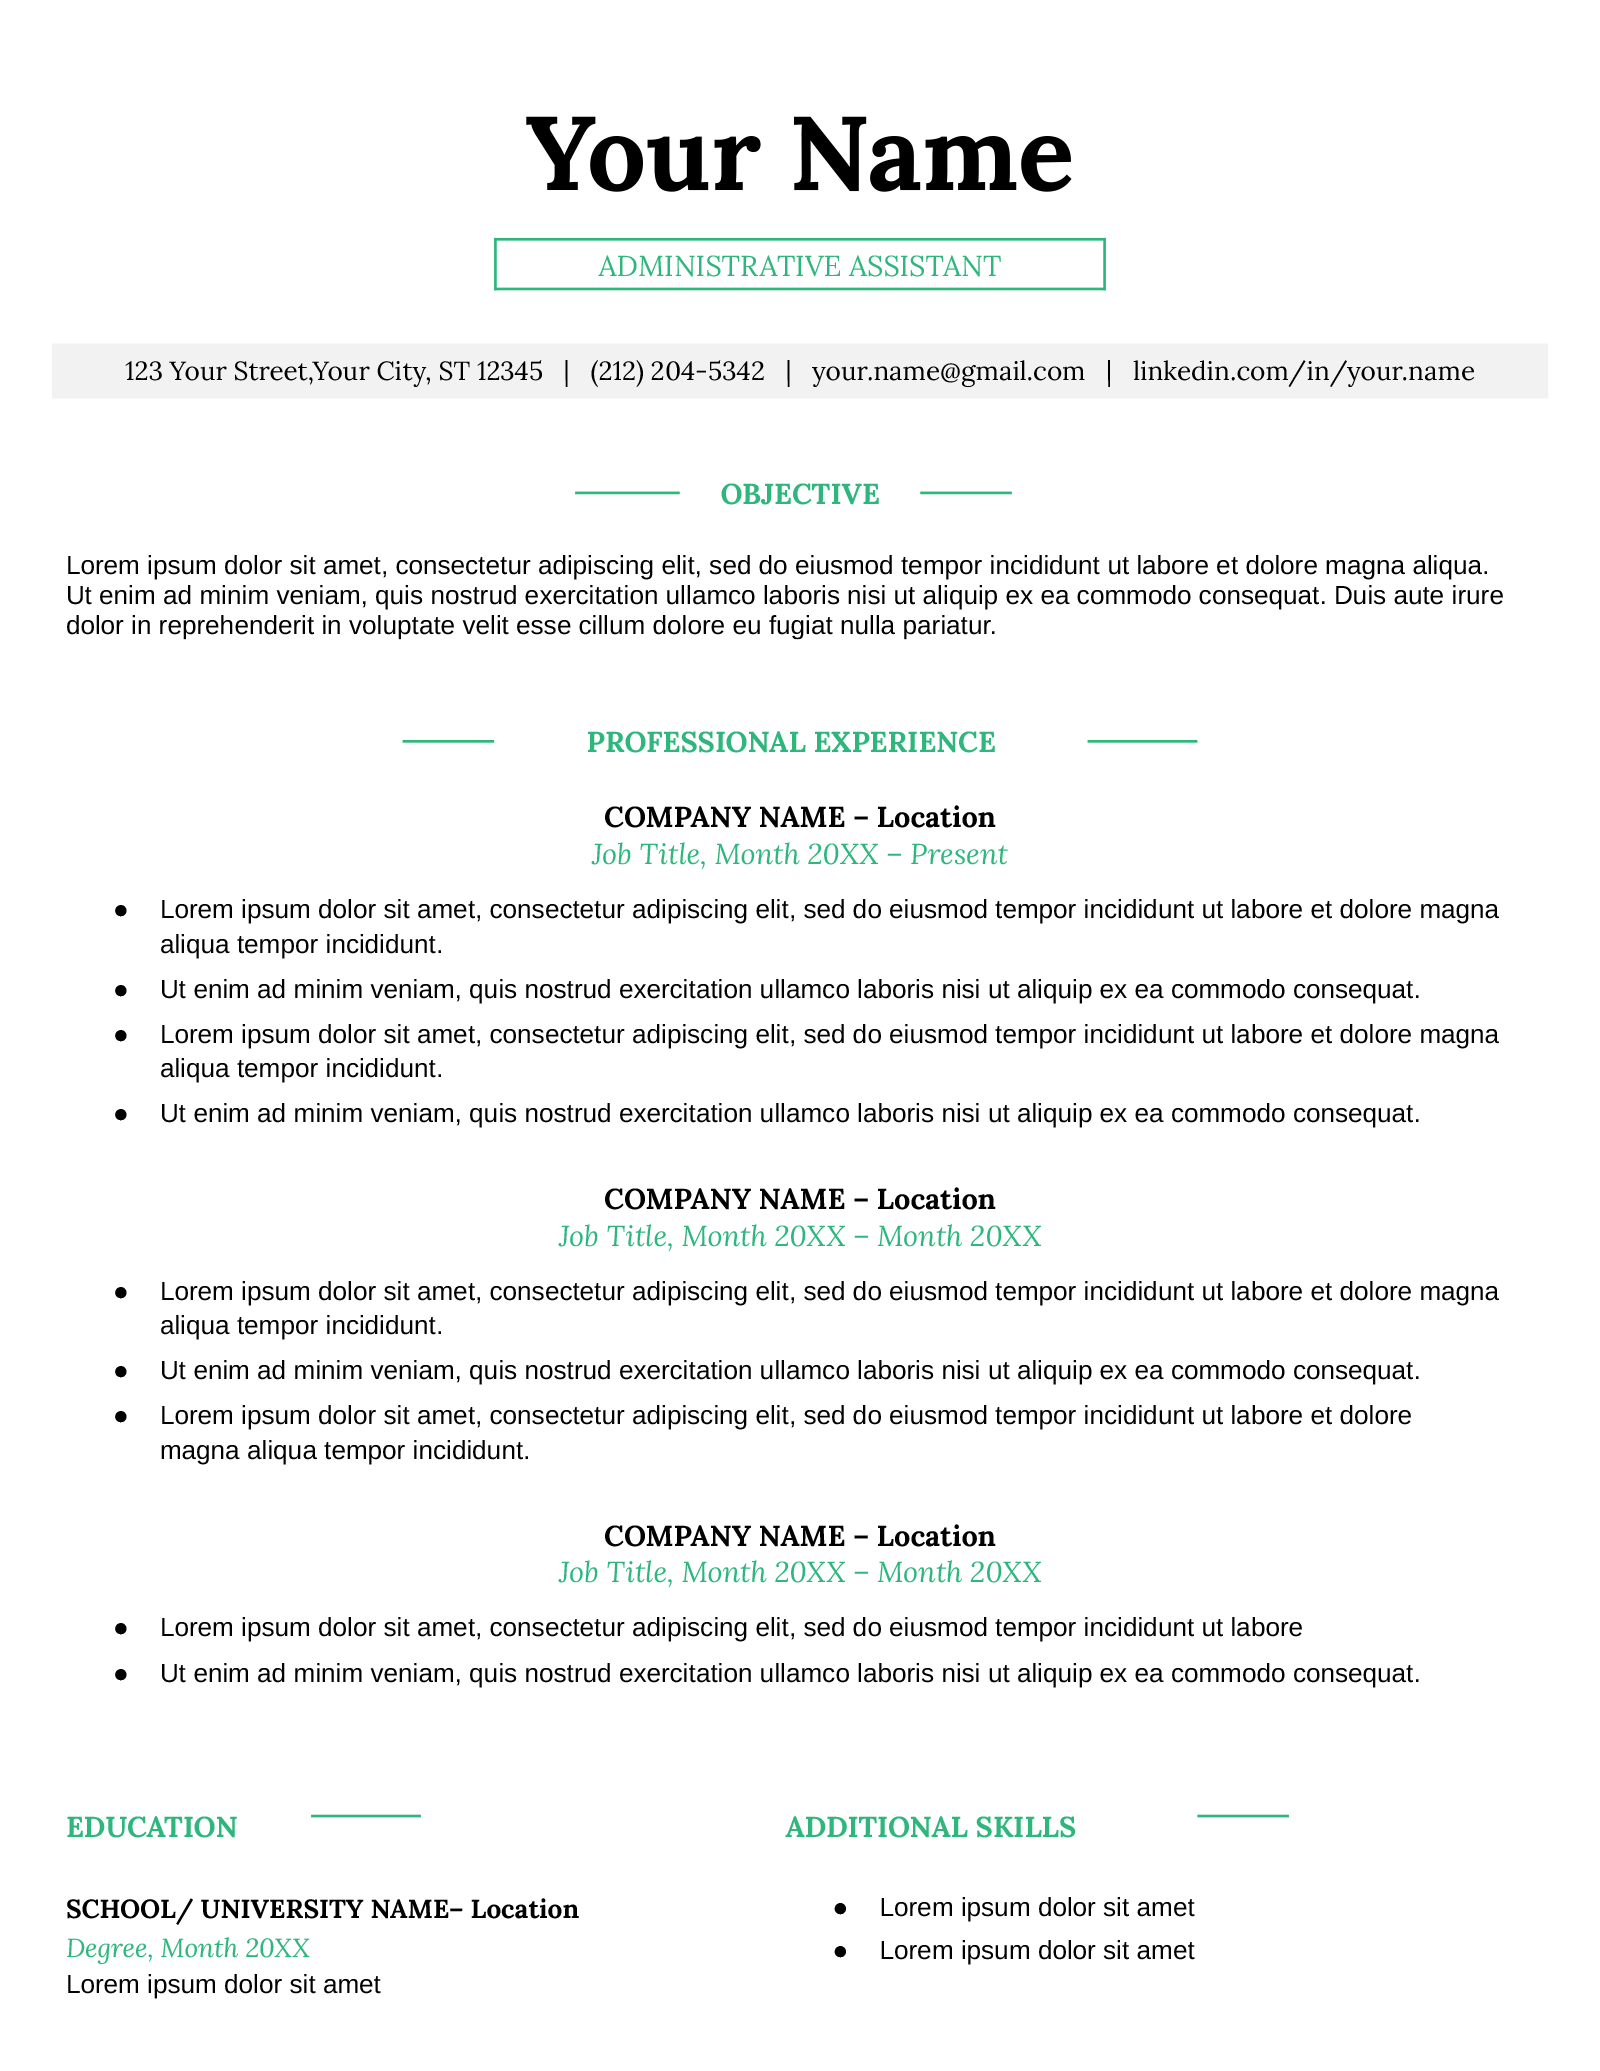 An example of the "Online" resume template in Google Docs